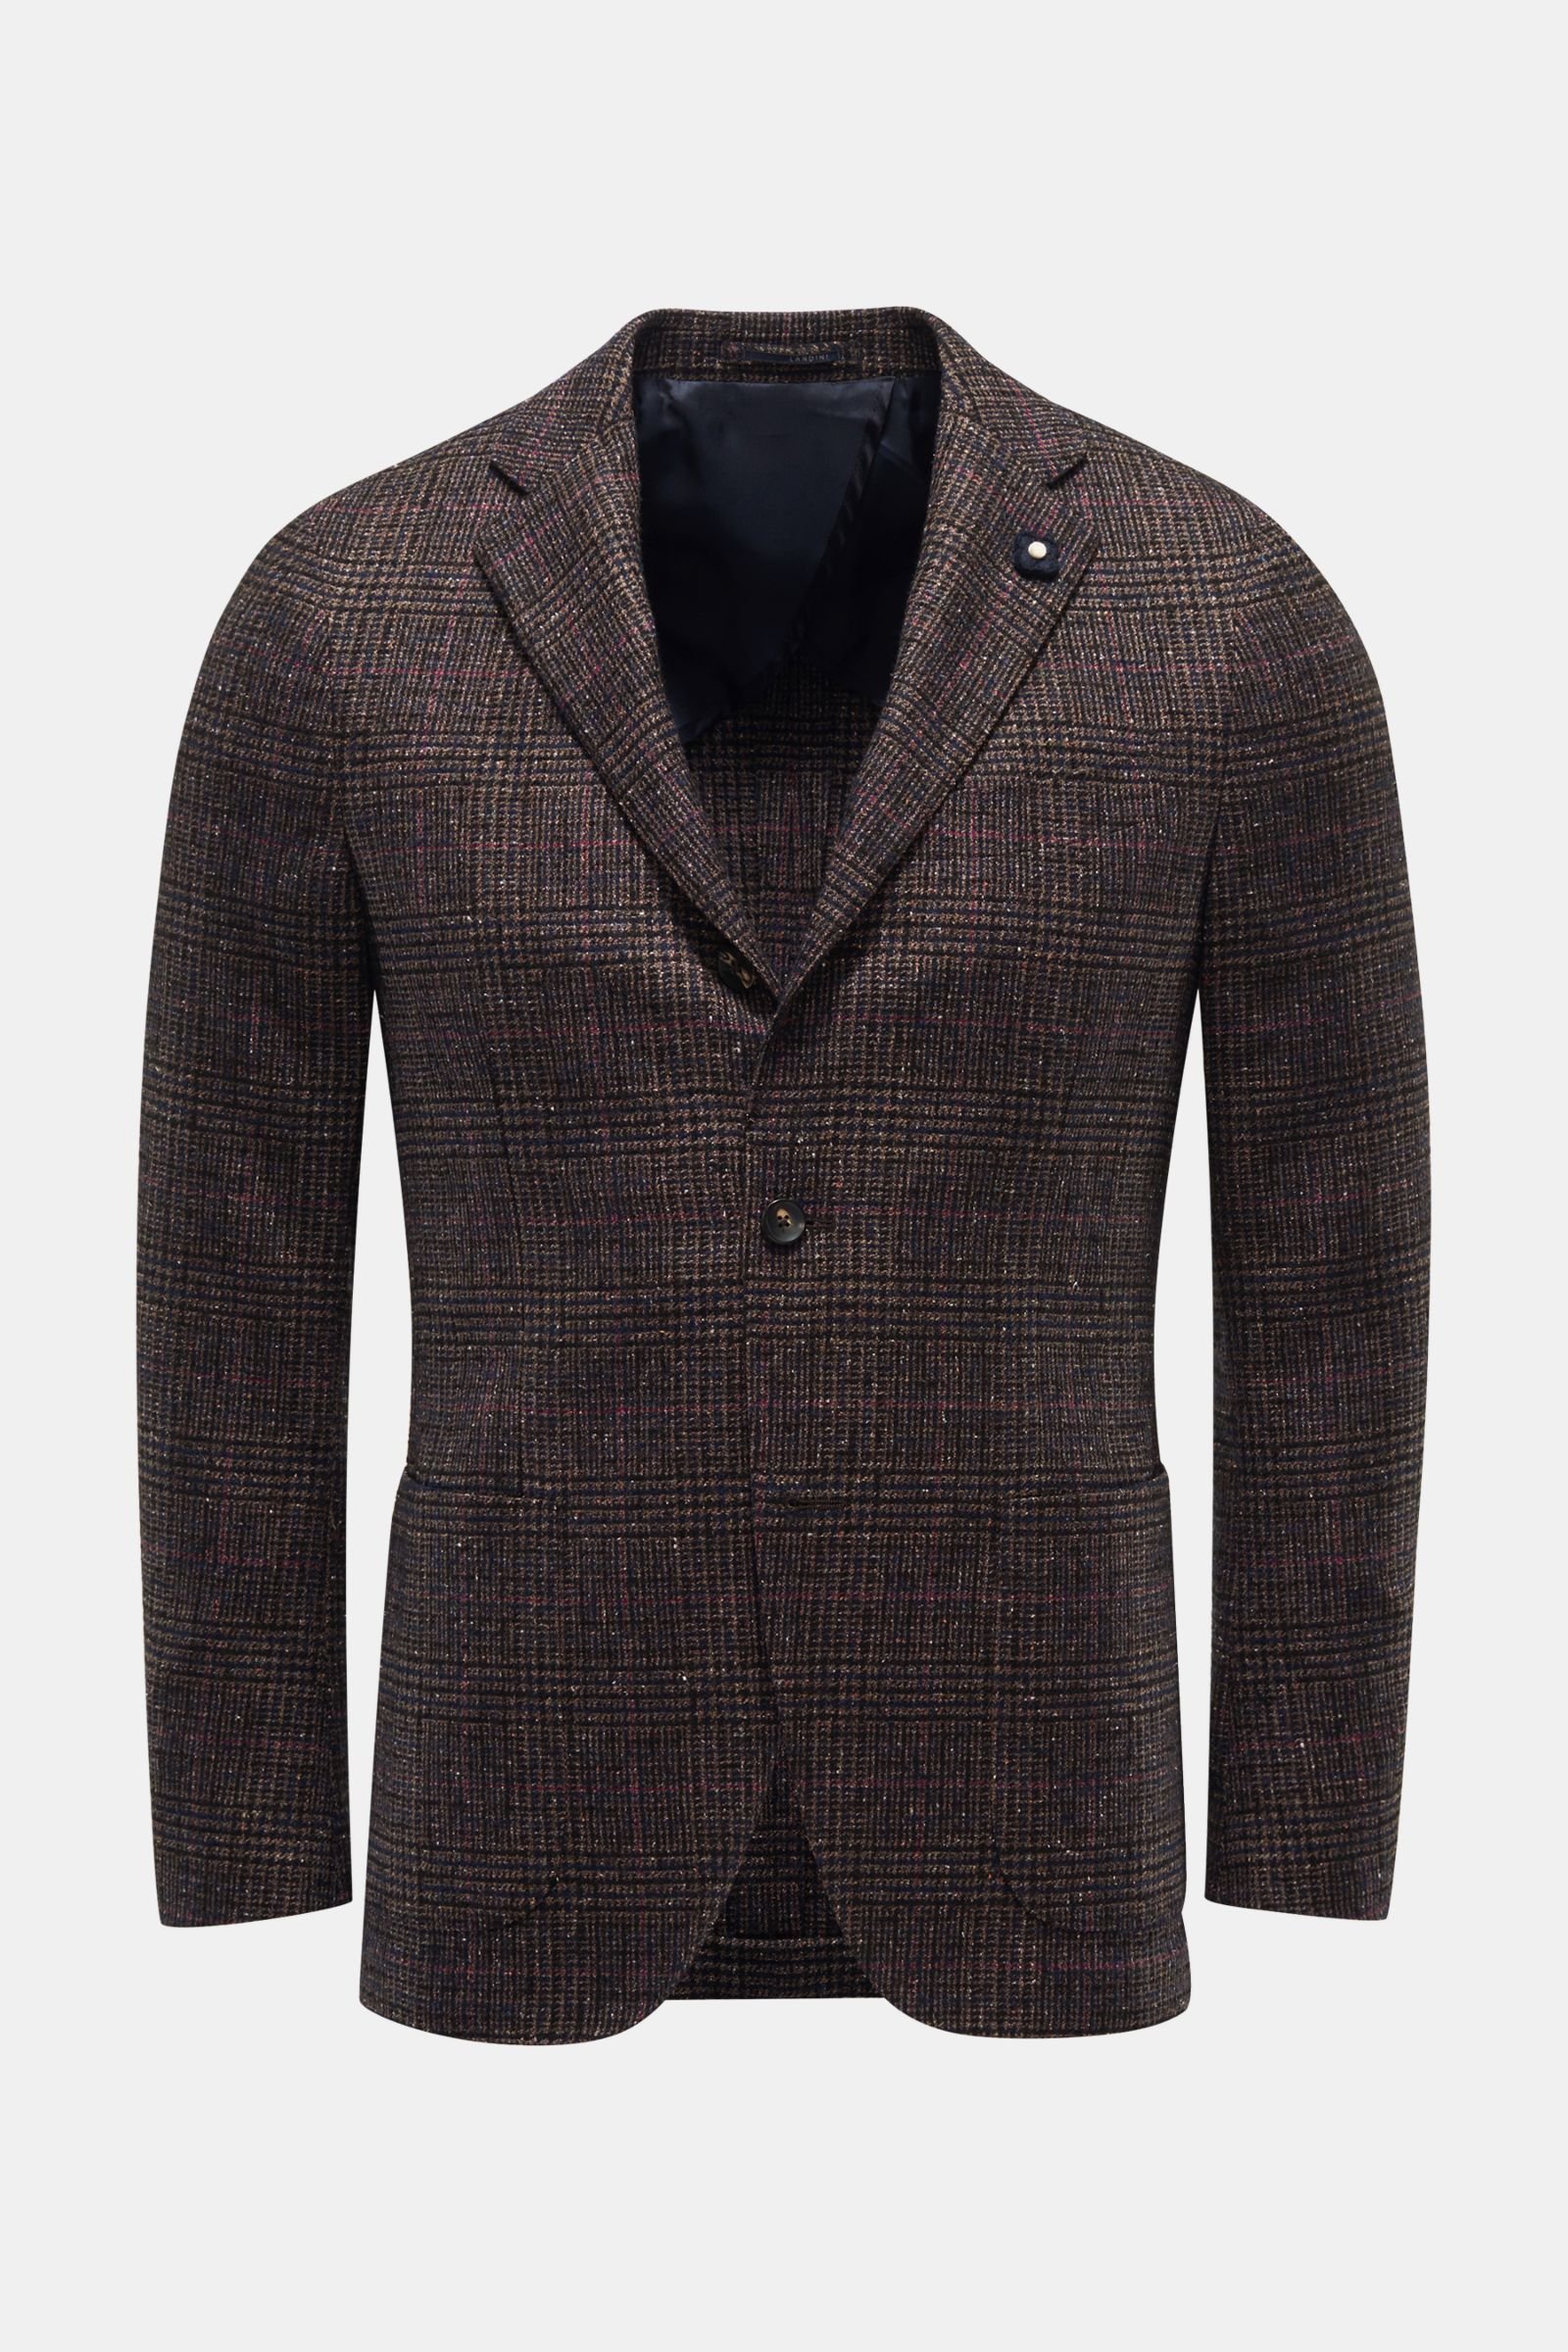 Smart-casual jacket grey-brown/navy checked